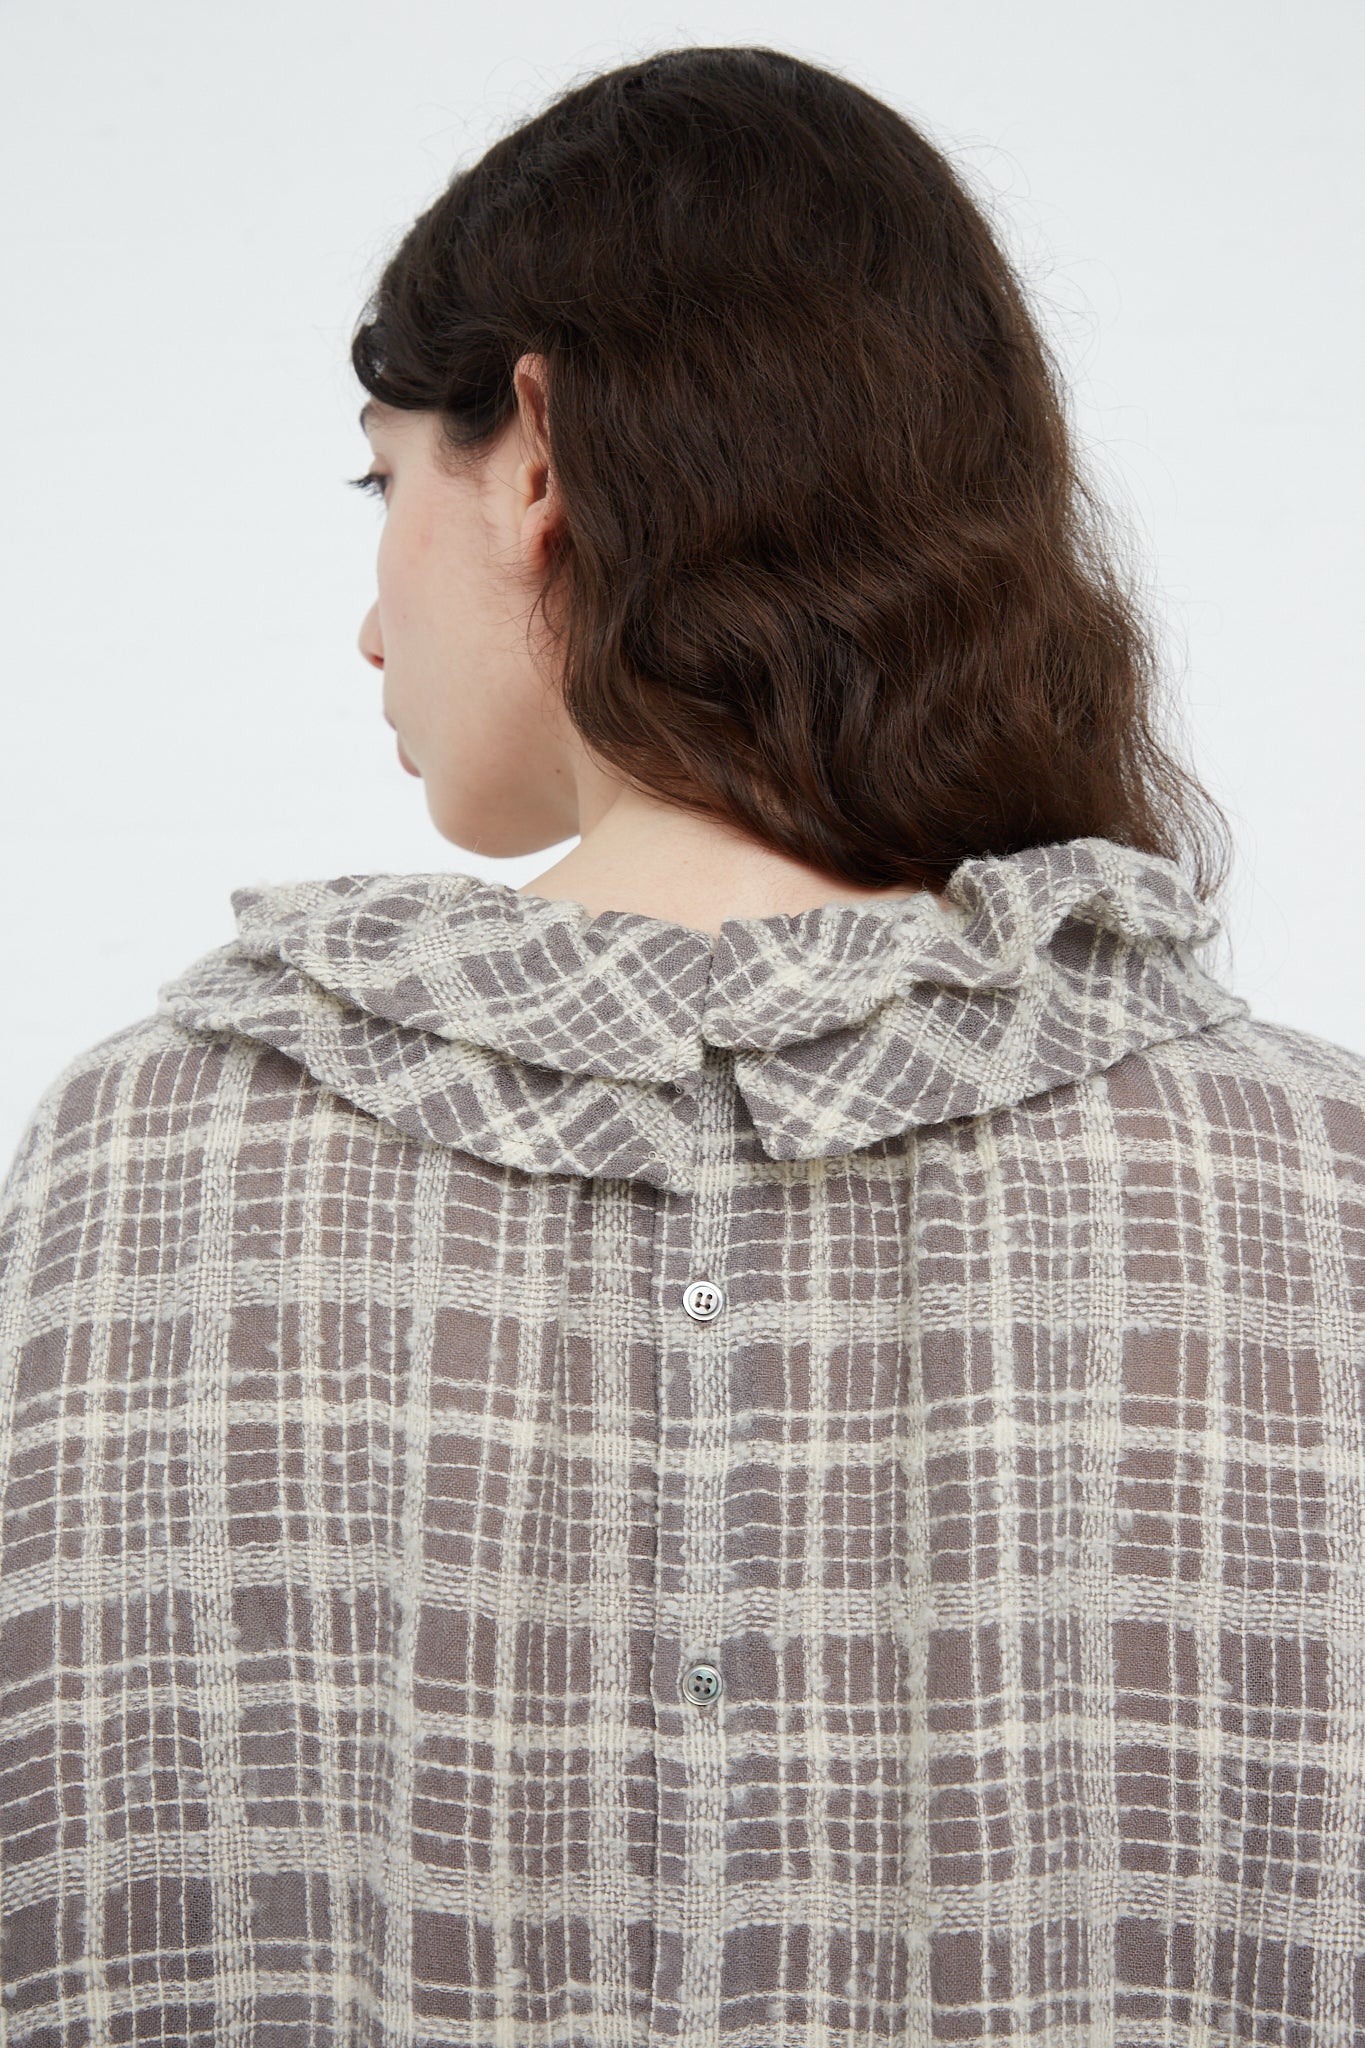 The back view of a woman wearing an Ichi Antiquités Wool Check Frill Dress in Mocha.